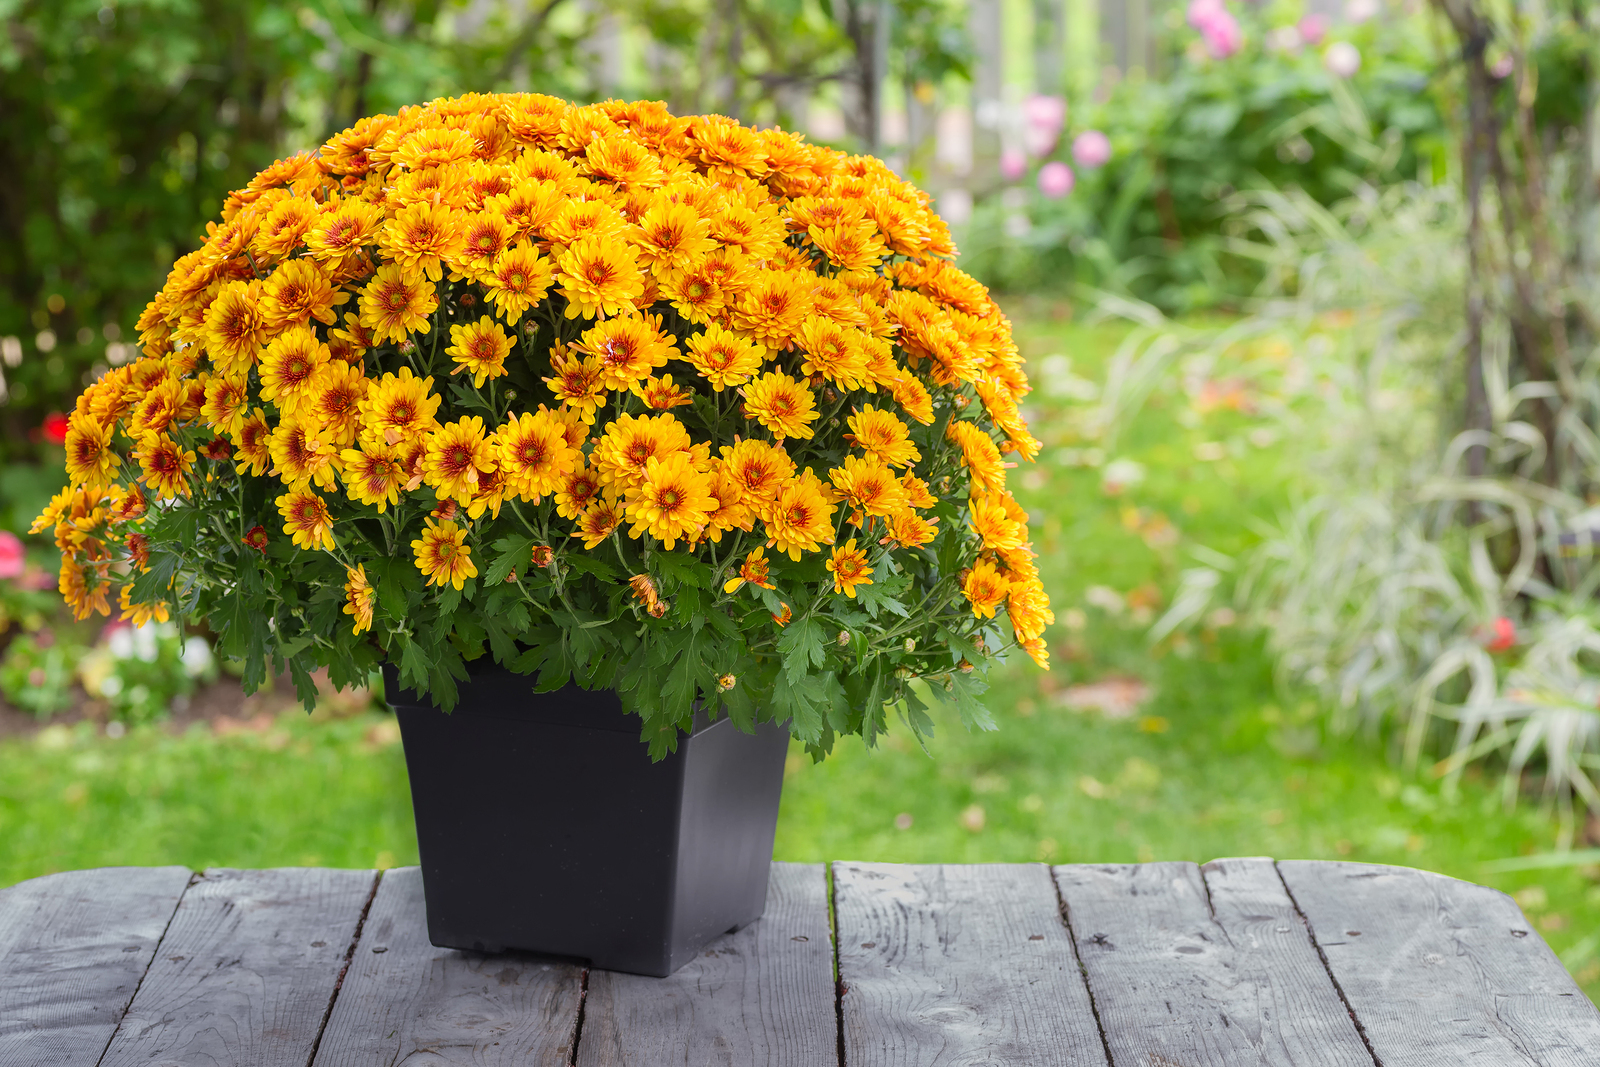 Fall Yard Care Tips: Beautify with New Trees, Shrubs, and Annuals